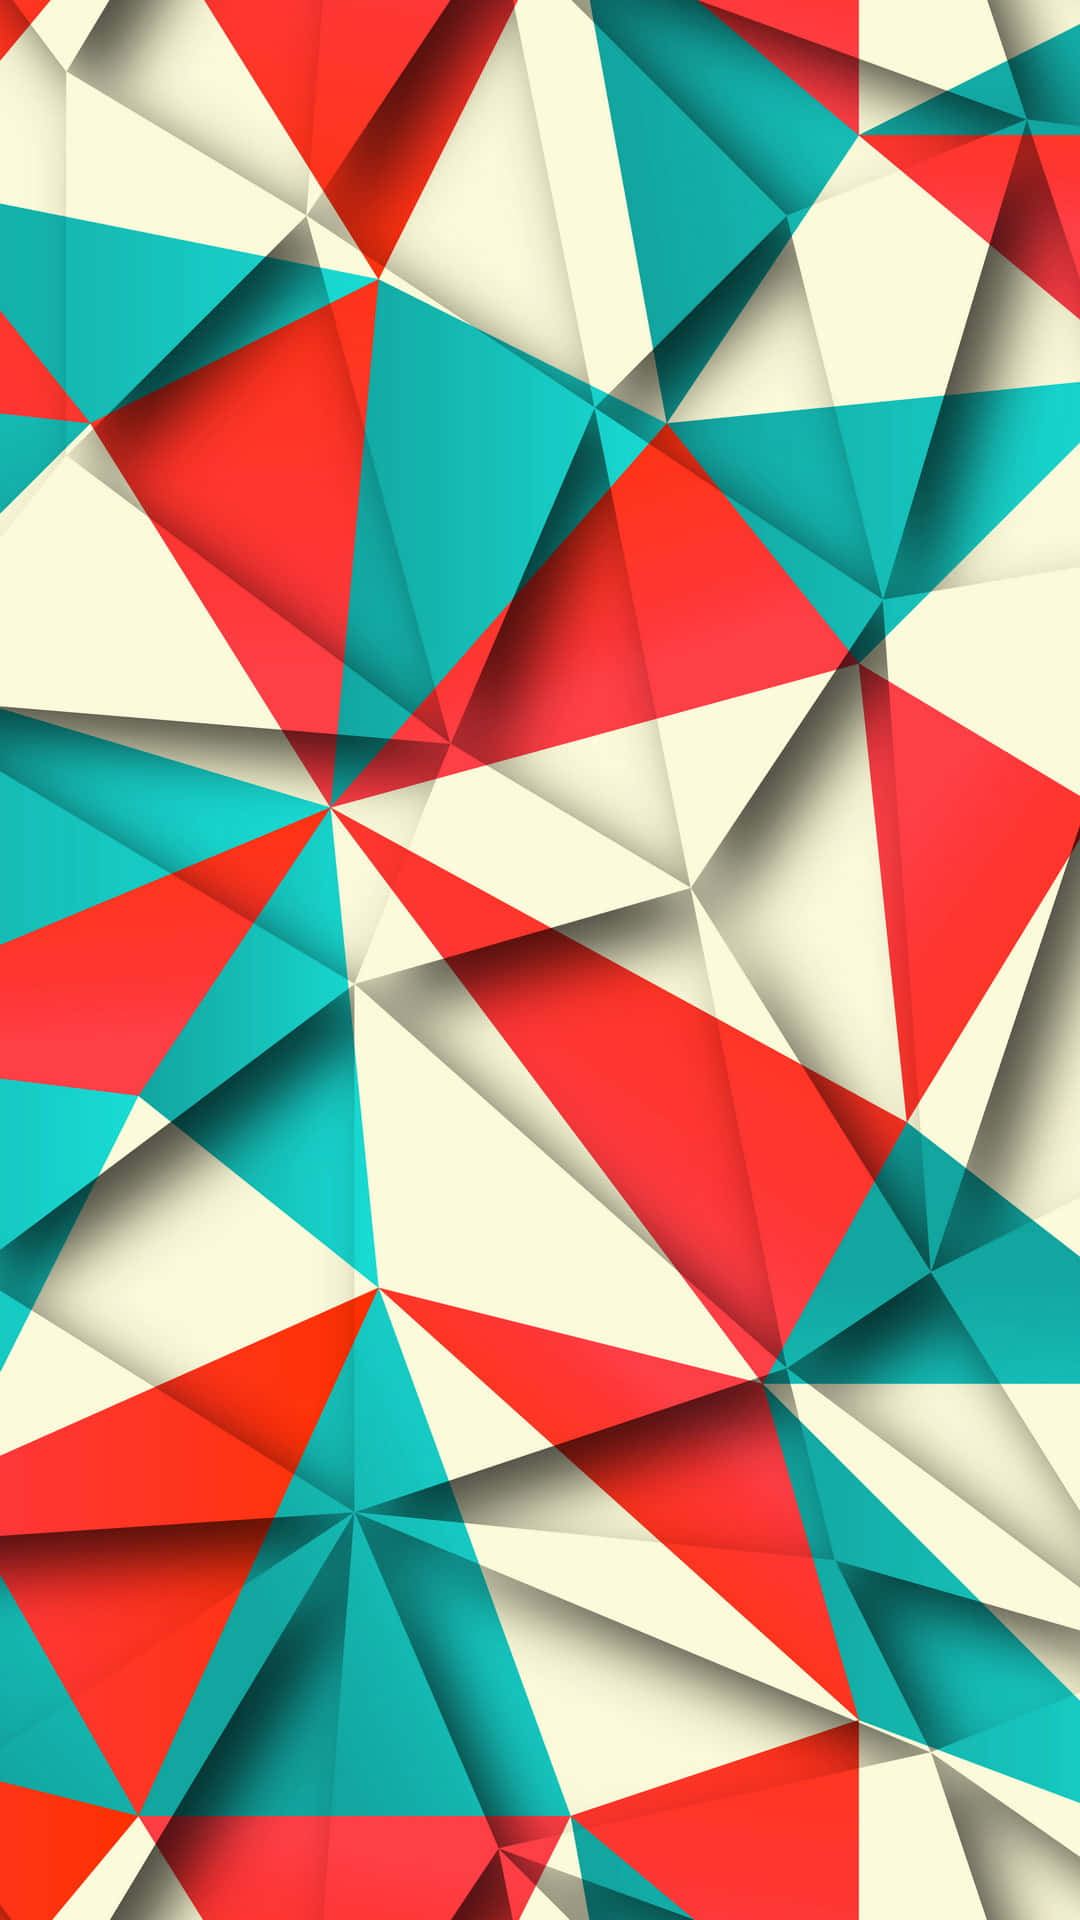 A Red, Blue And White Geometric Pattern Wallpaper